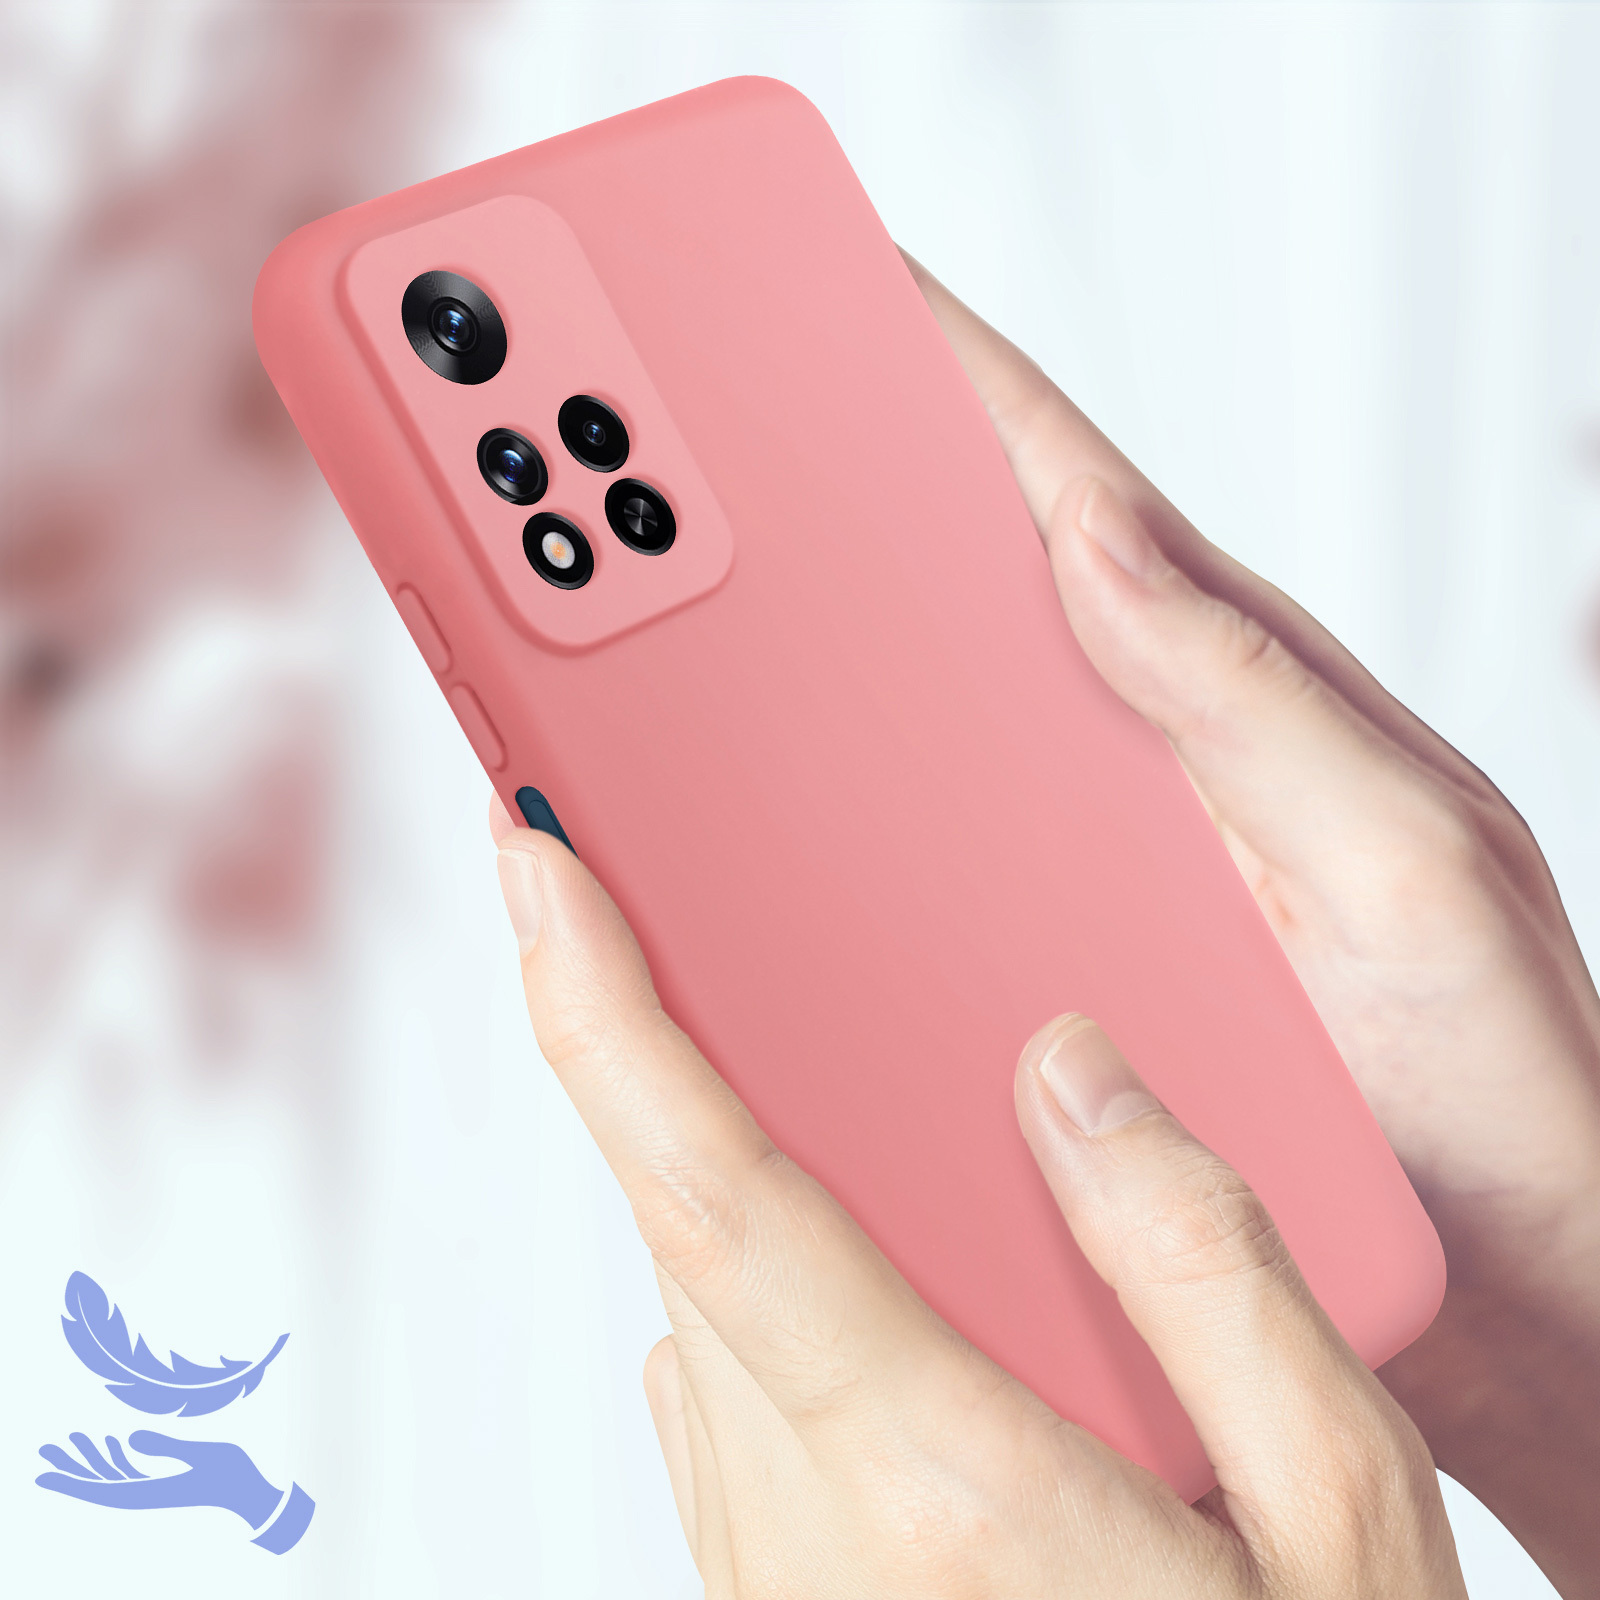 AVIZAR Soft Touch Handyhülle Series, Backcover, Redmi Xiaomi, 11 Rosa Pro Note Plus